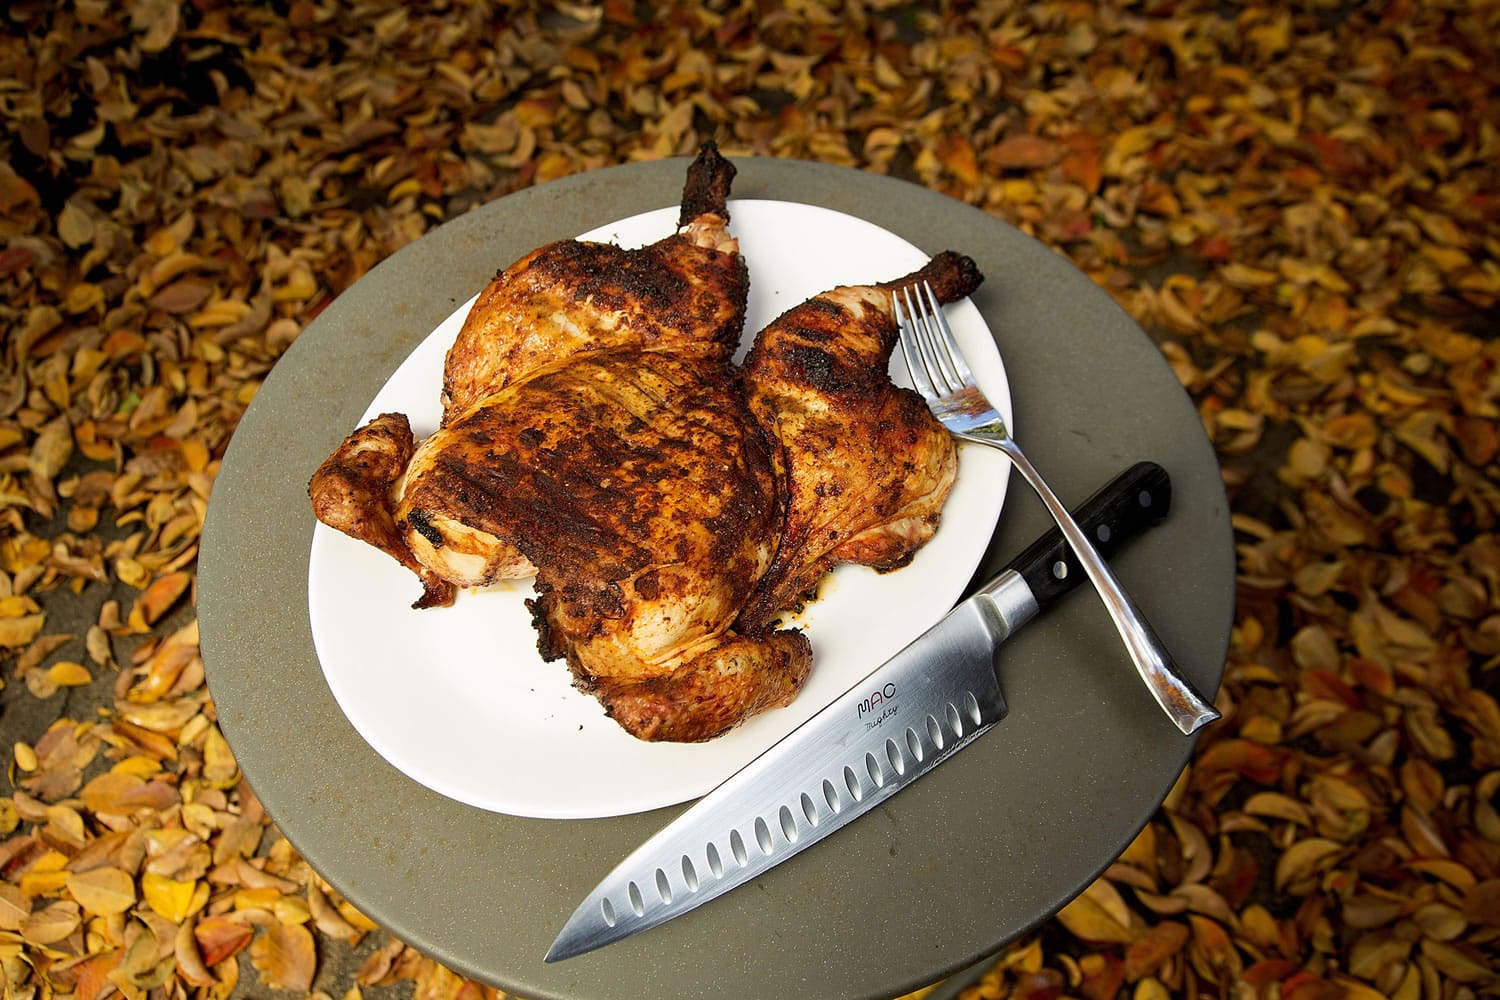 Place a chicken, skin side down, over indirect heat, set bricks on top, and grill, covered, until skin is golden and crisp, 25-30 minutes. Using tongs, remove bricks; turn chicken, skin side up.